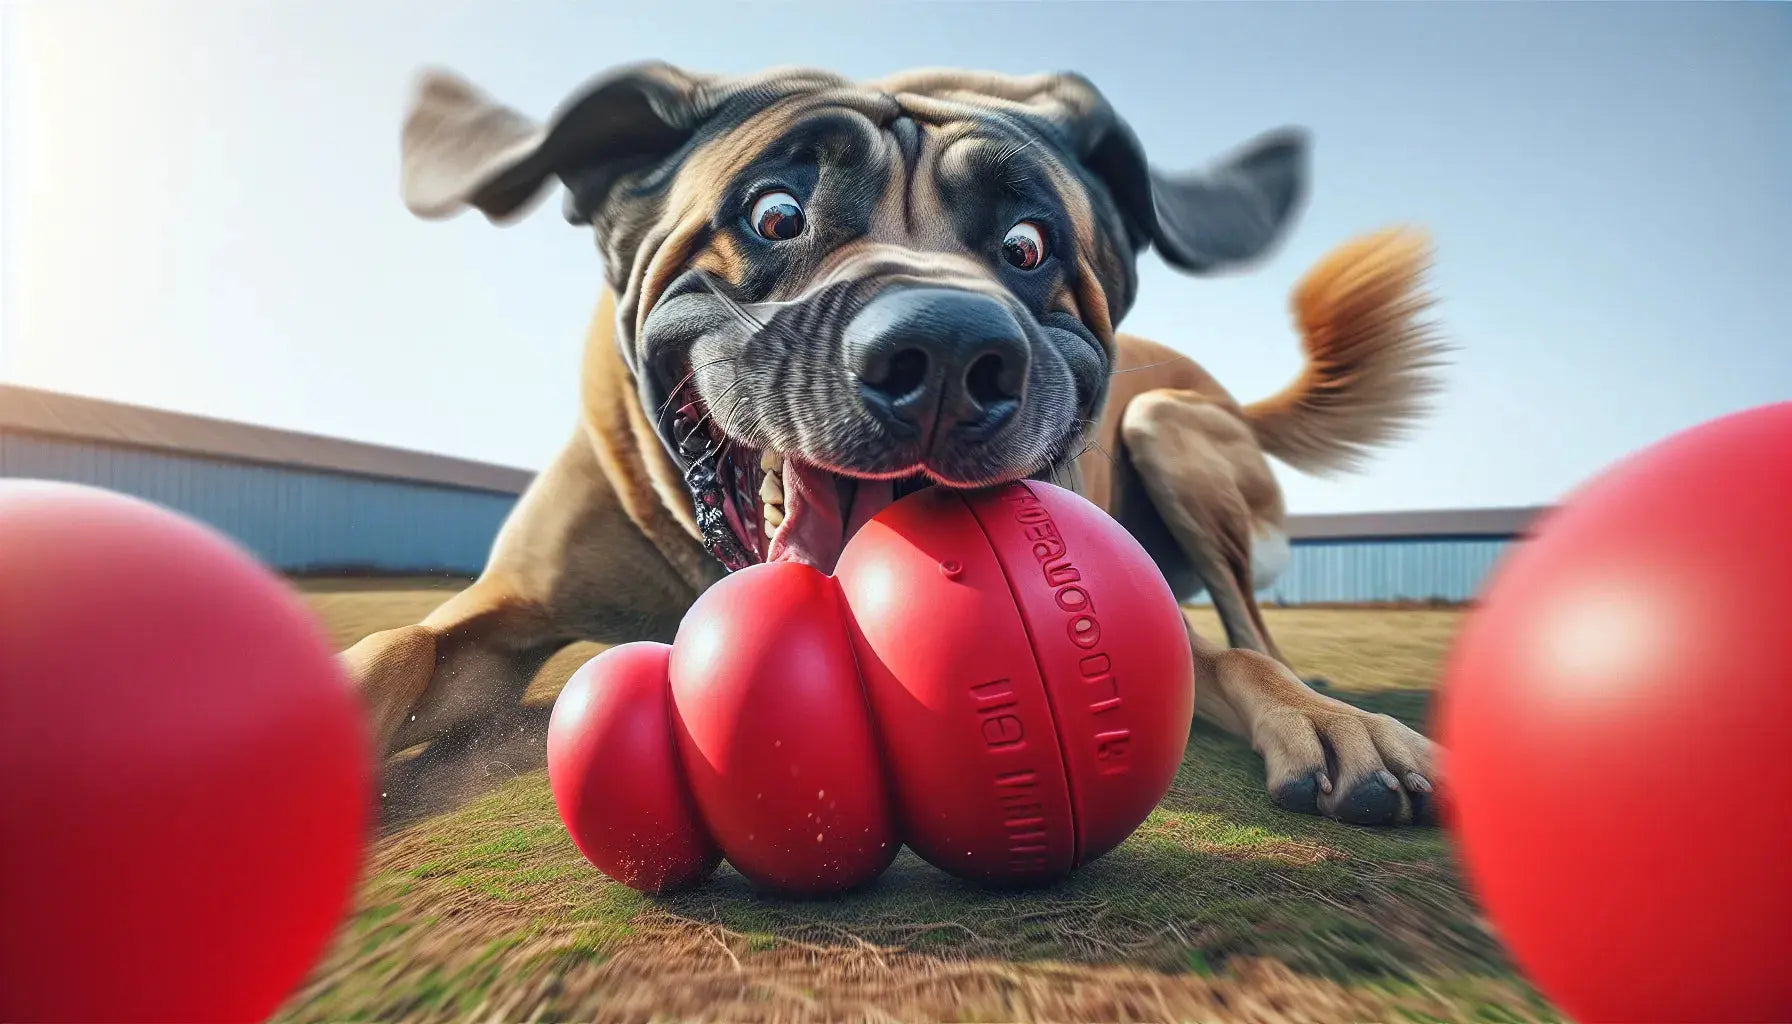 Keep Your Large Dog Happy and Entertained with the Best Kong Toy